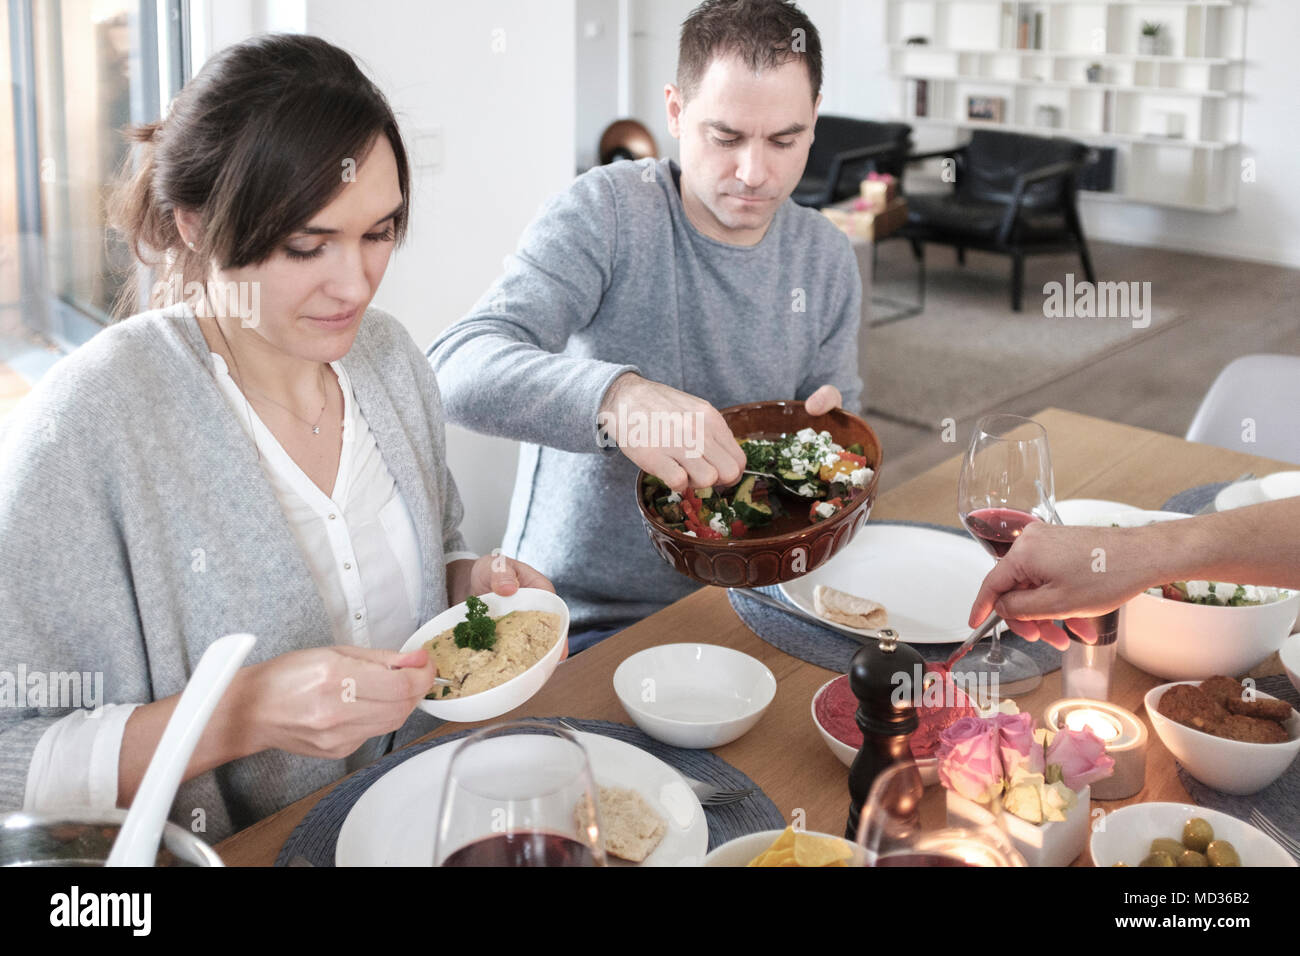 Group of friends casually snacking on a selection of food while laughing and enjoying themselves. Serving roasted vegetables- selective focus Stock Photo